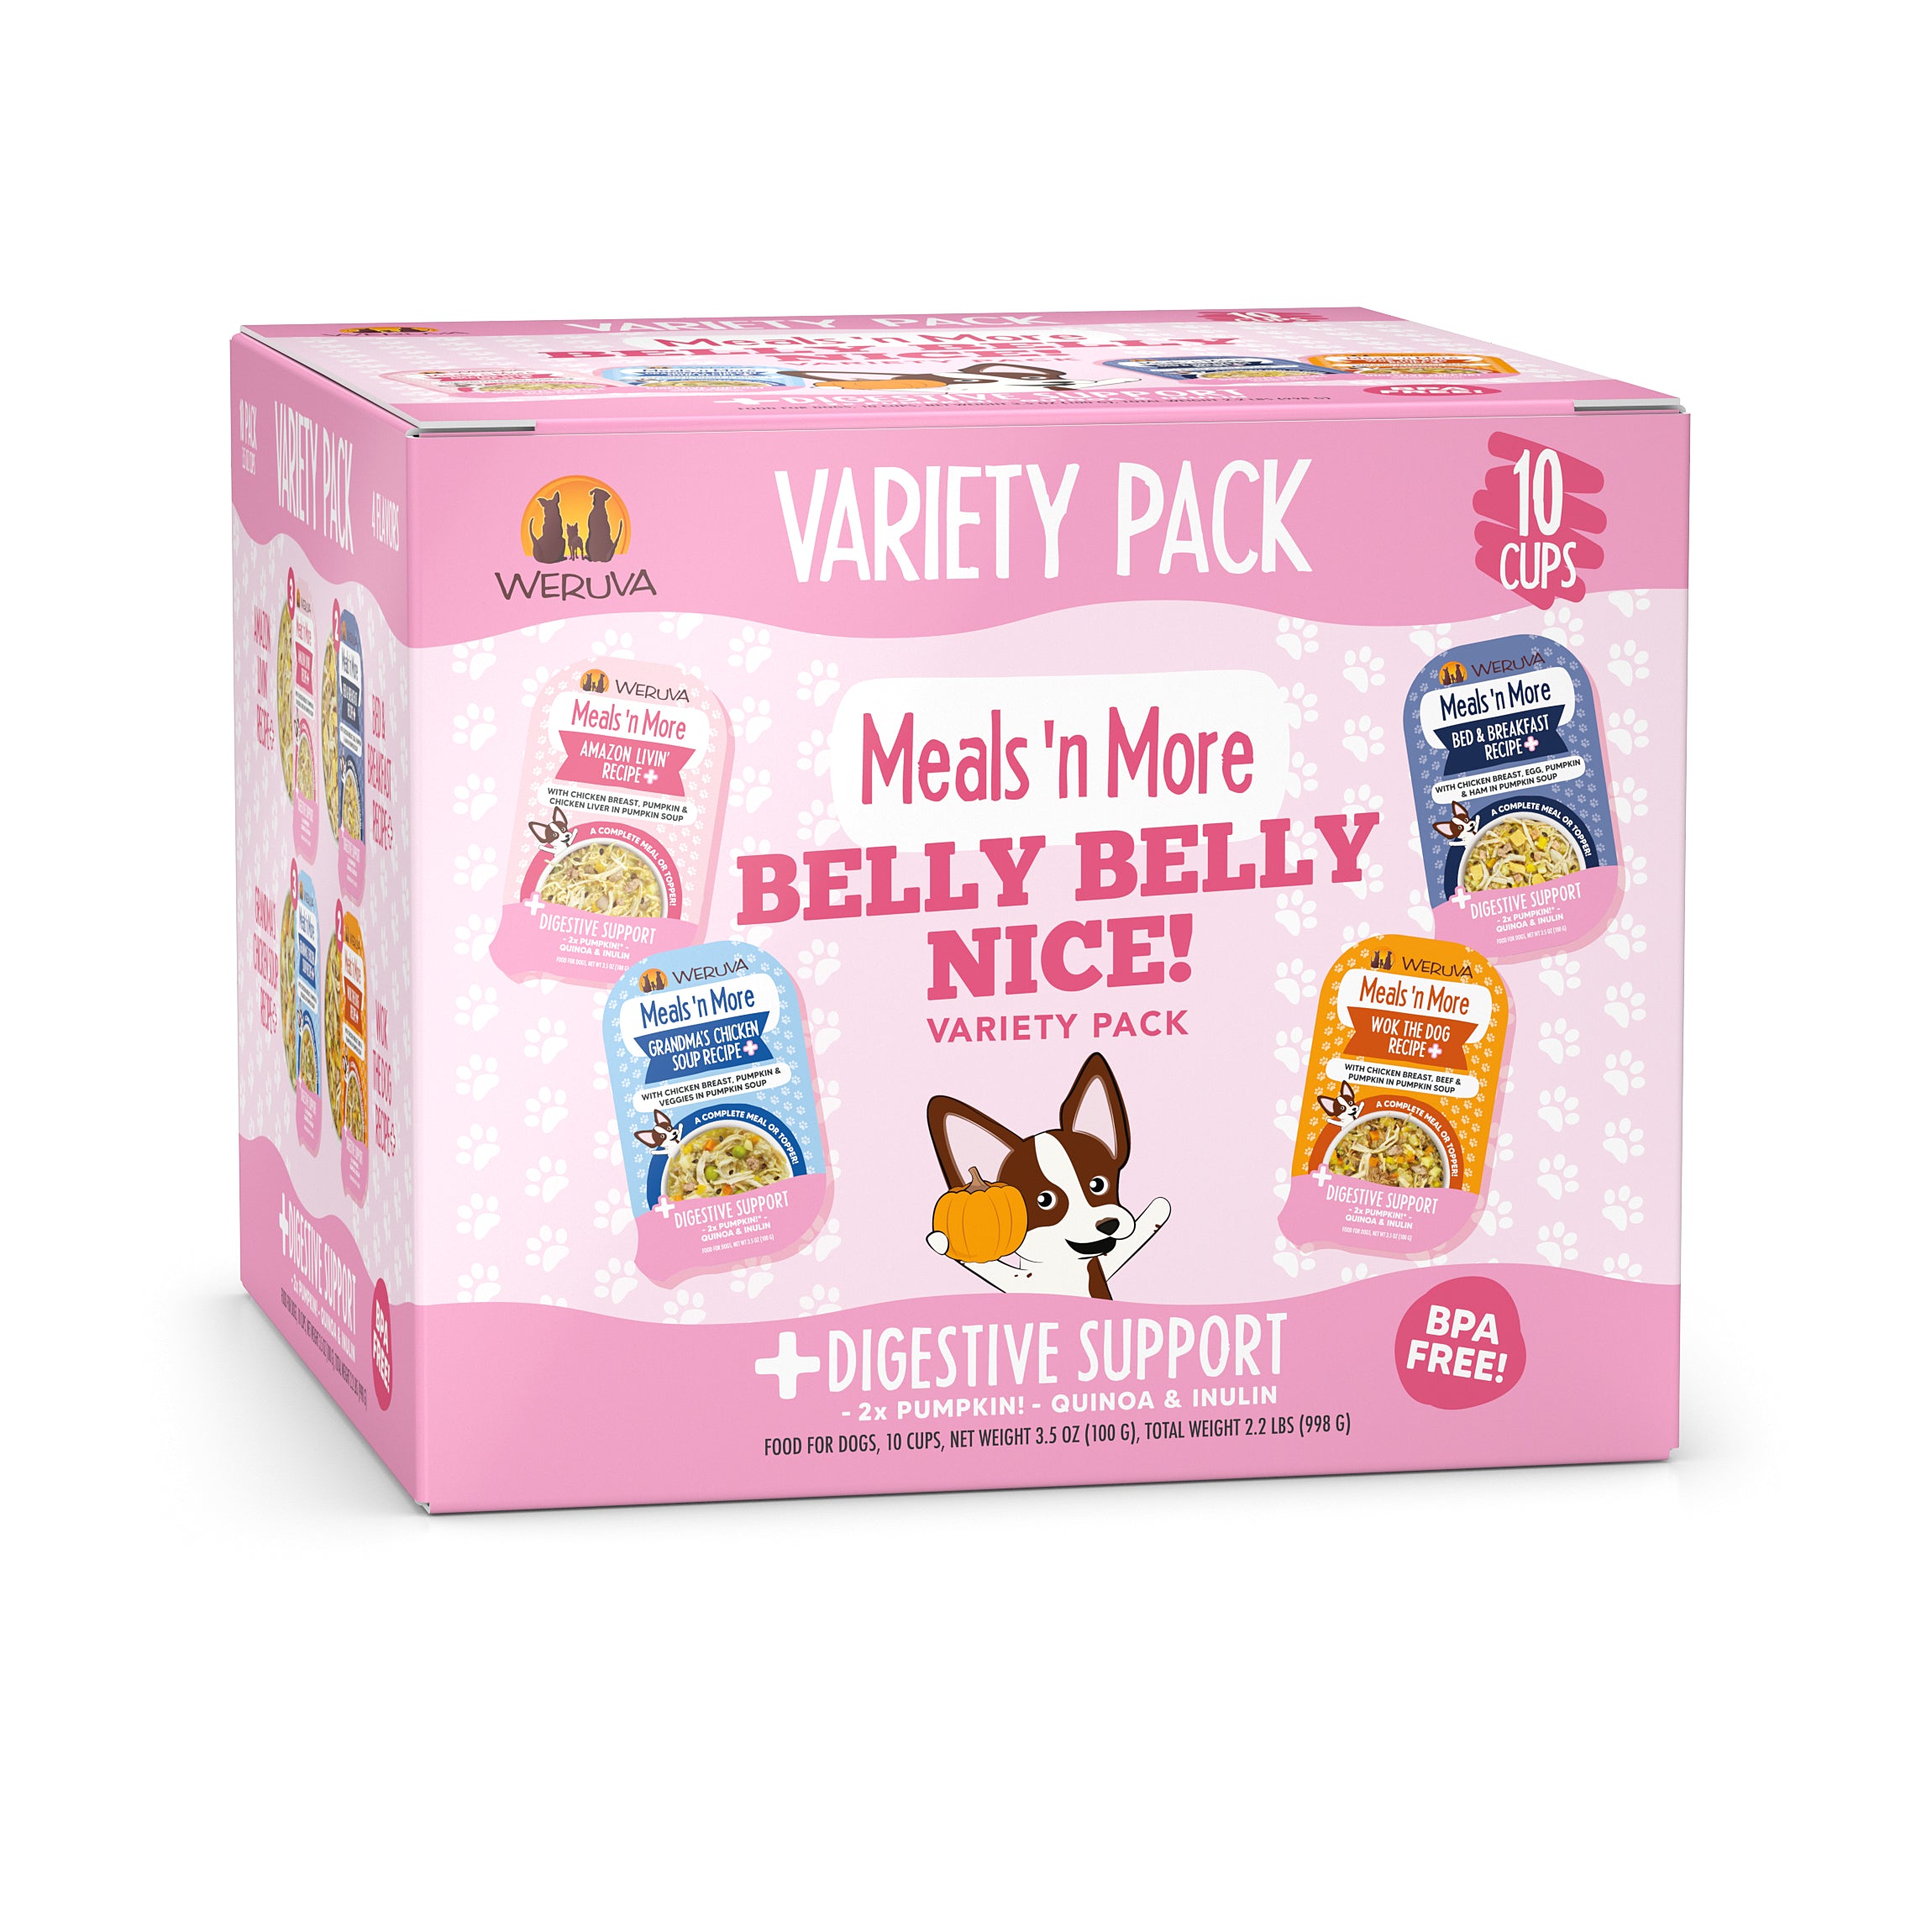 Weruva Meals 'n More Digestive Support - Belly Belly Nice! Variety Pack